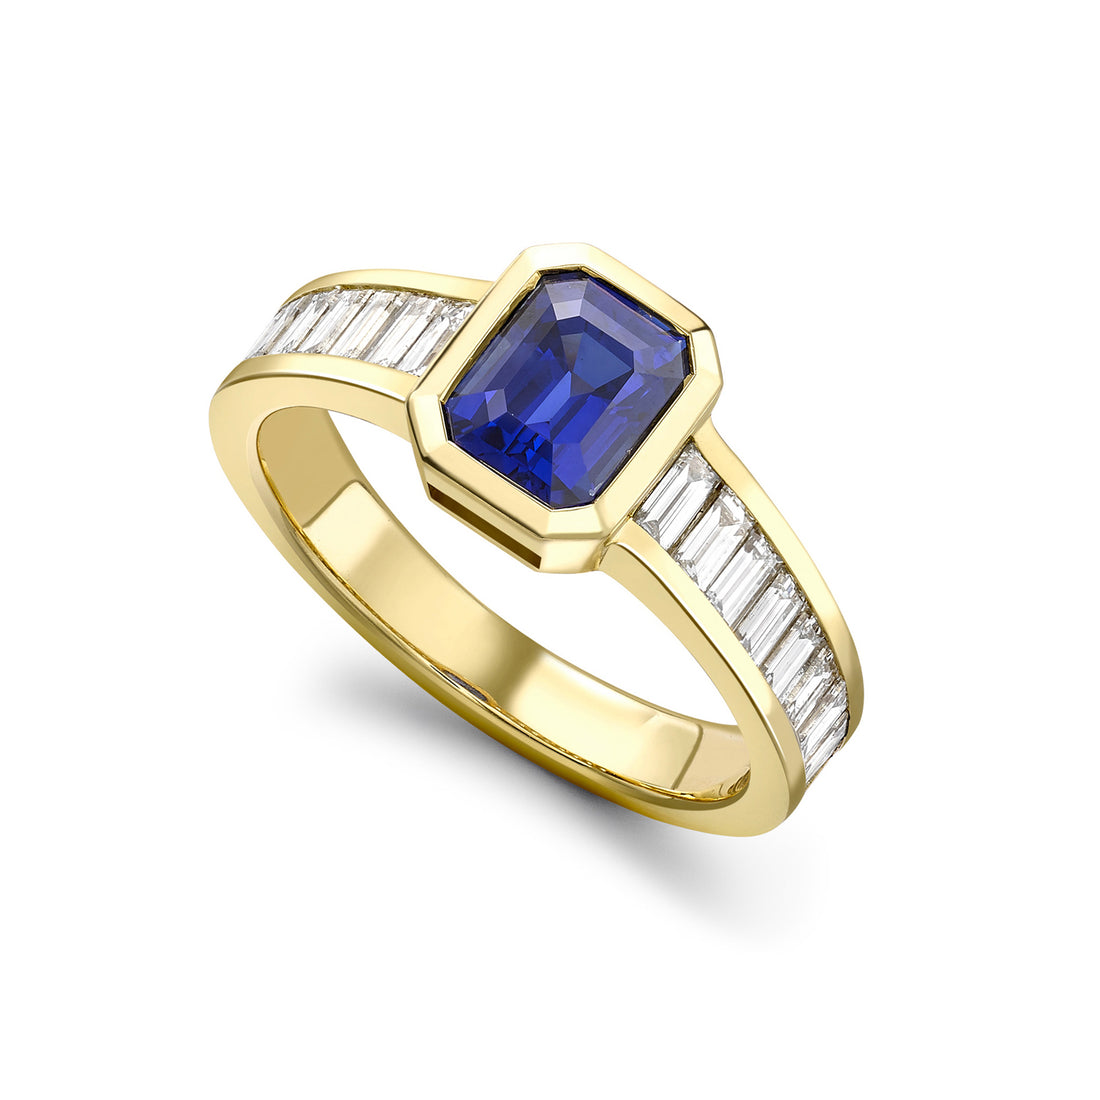  Sapphire & Diamond Engagement Ring by Emma Franklin | The Cut London